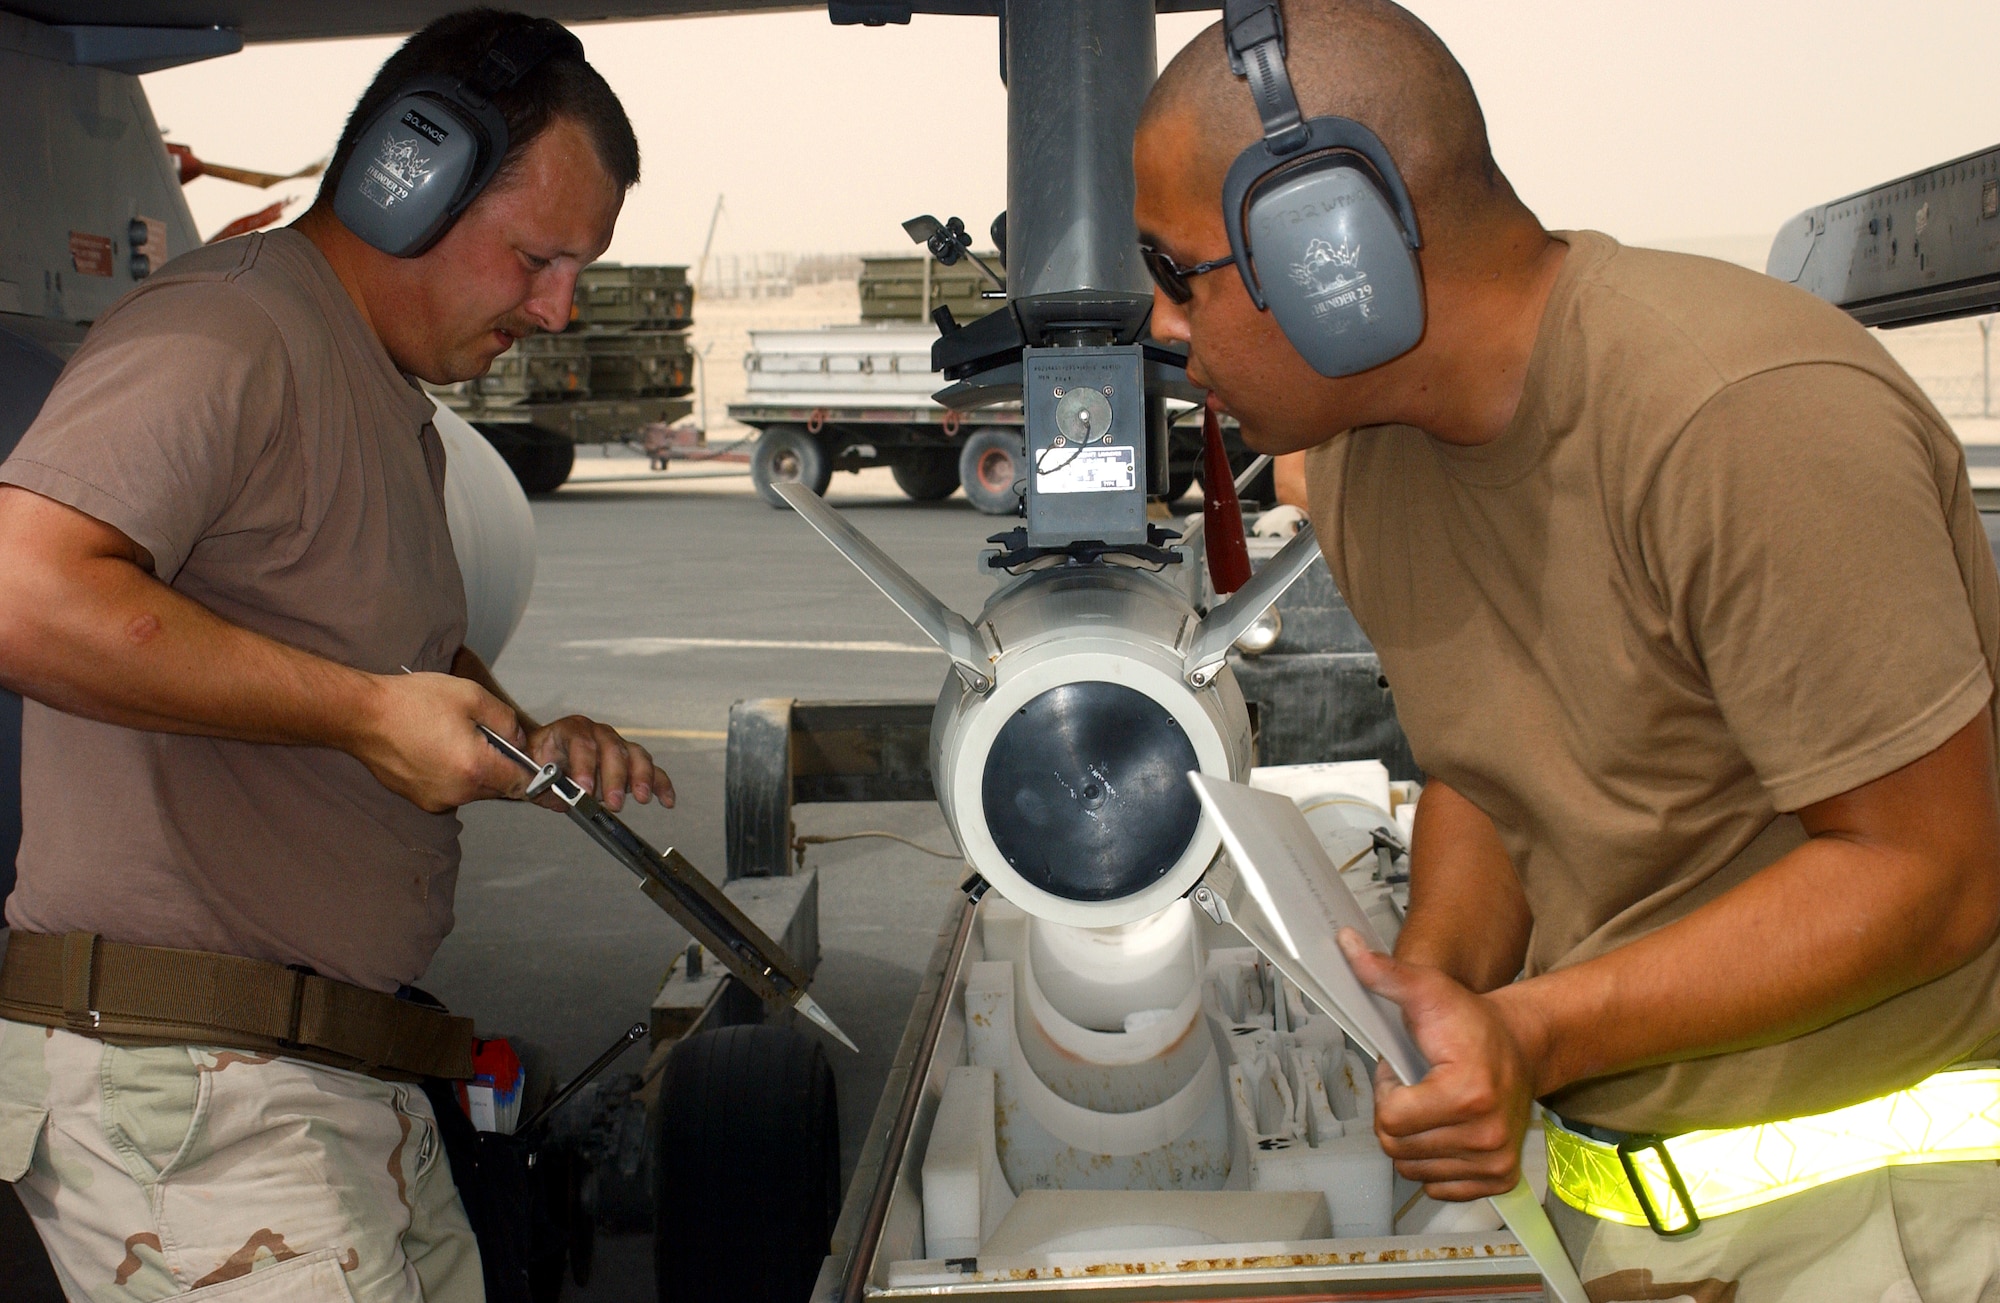 OPERATION IRAQI FREEDOM -- Staff Sgt. David Ross (left) and Airman 1st Class Eduardo Sera attach fins to a missile for an F-16 Fighting Falcon at a forward-deployed location in Southwest Asia.  (U.S. Air Force photo by Master Sgt. Terry L. Blevins)

